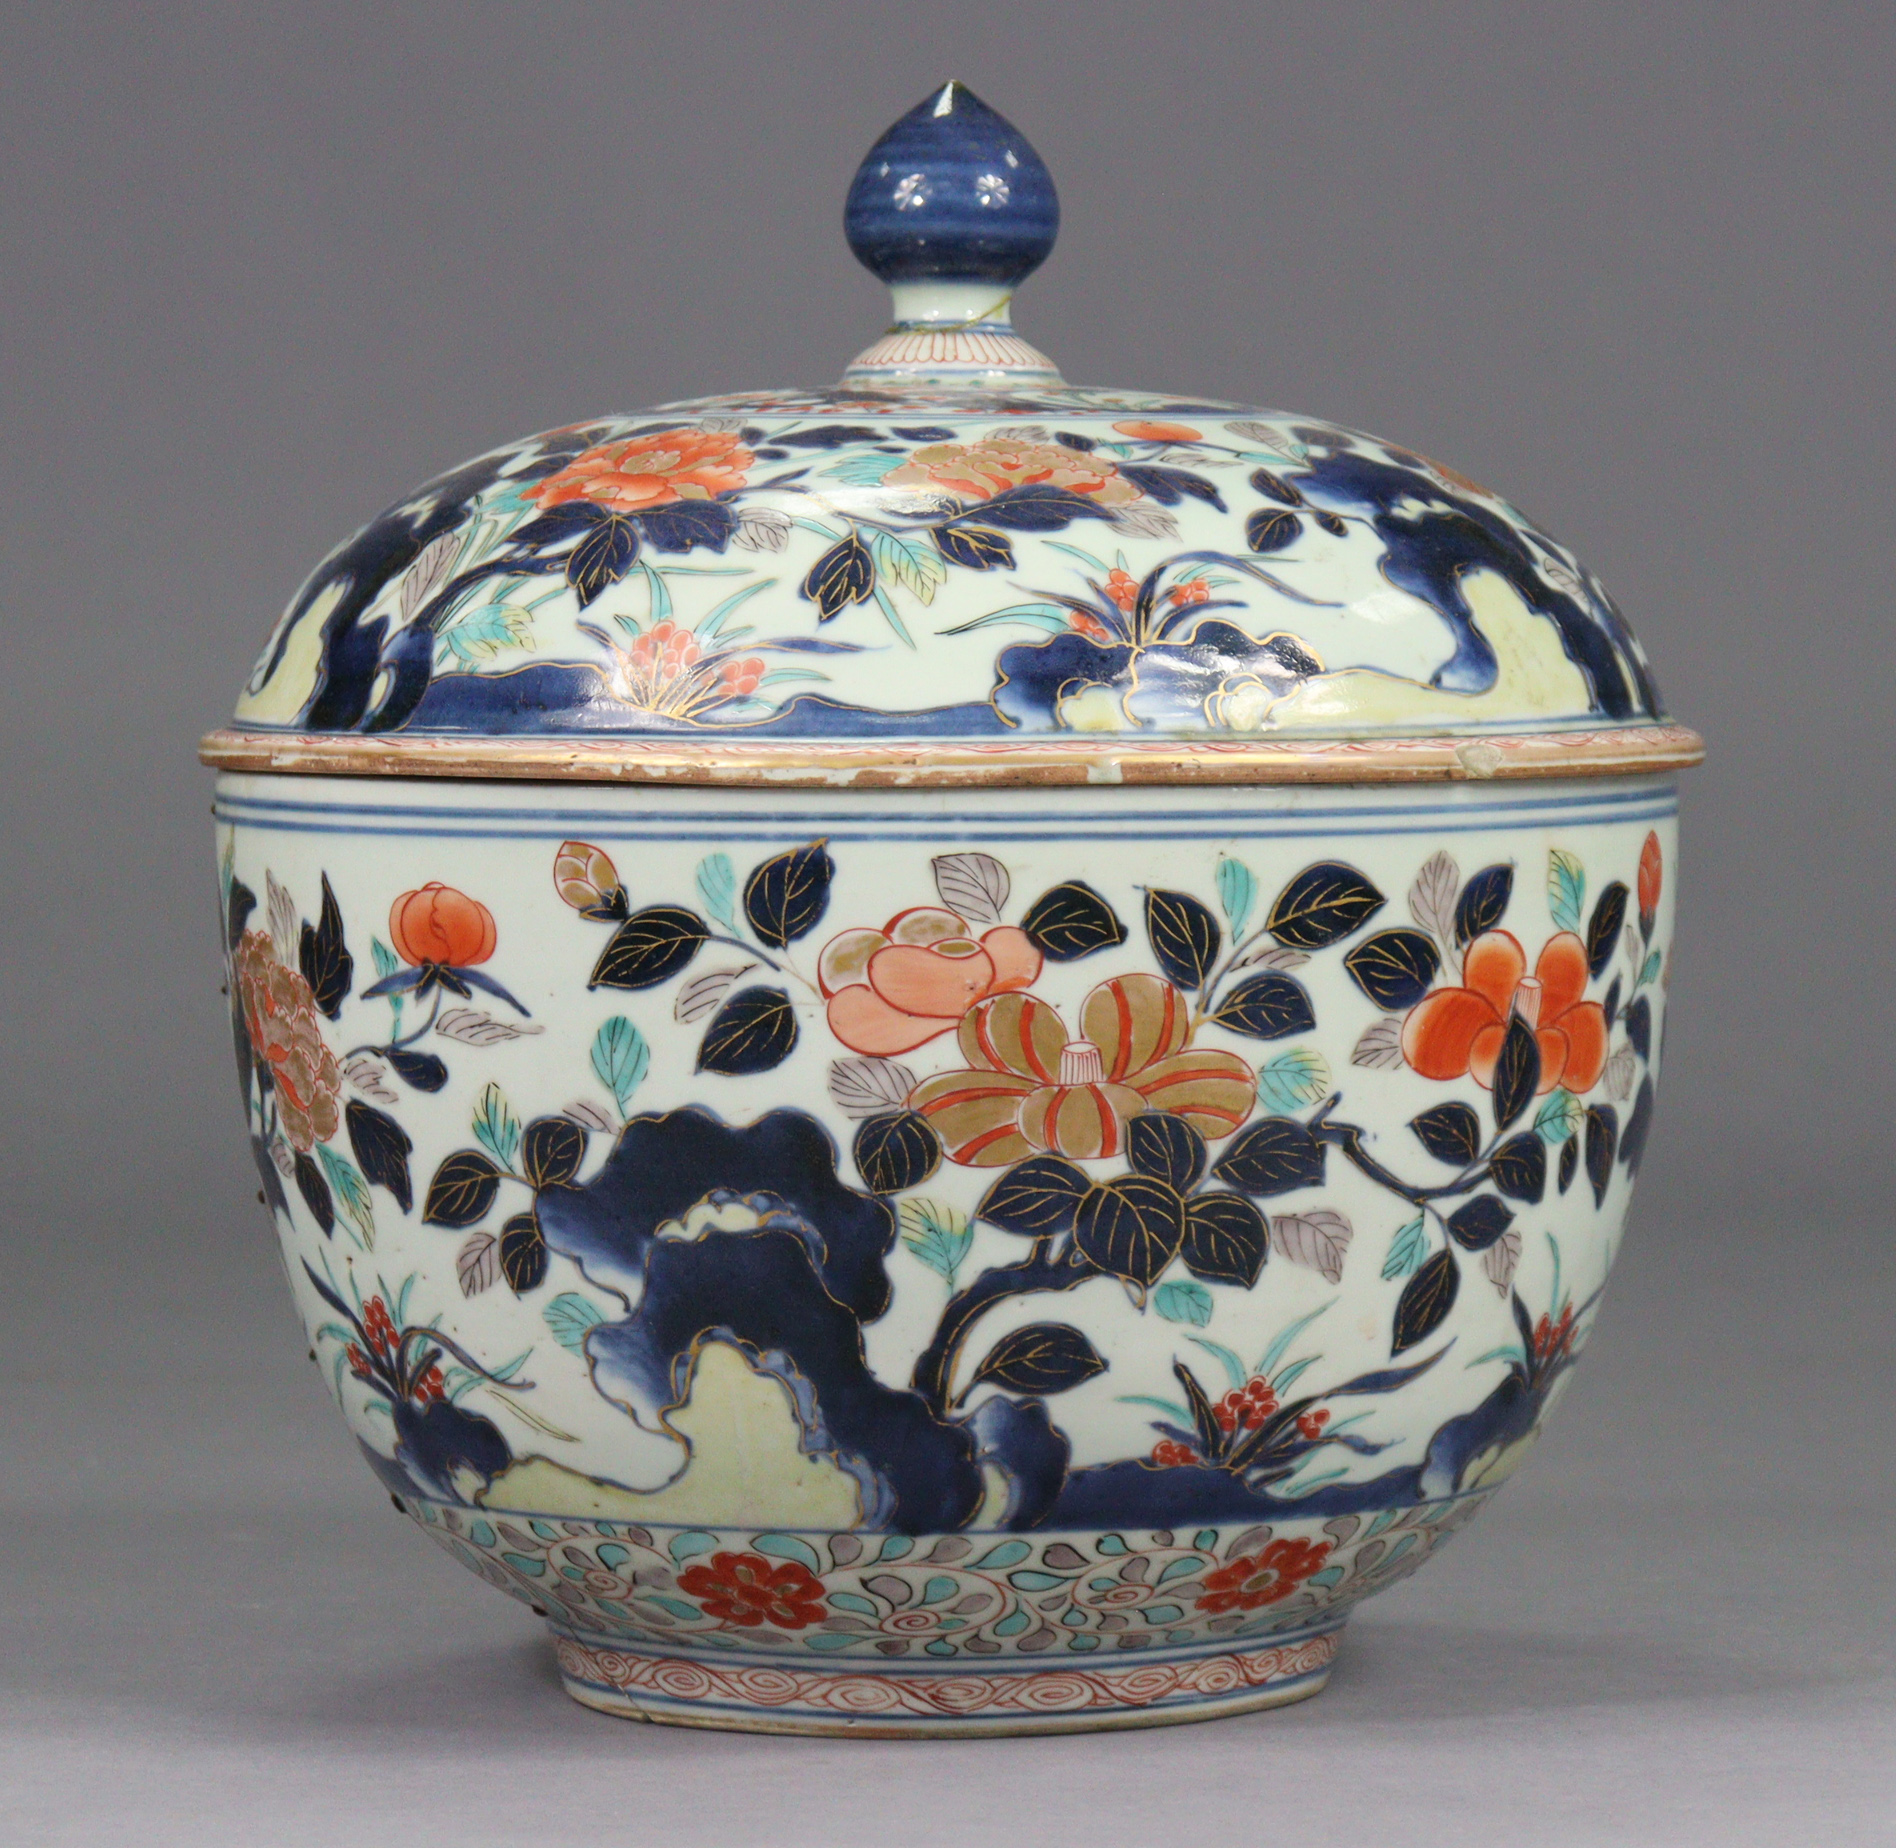 A 17th/18th century Japanese porcelain large circular pot & cover, with all-over lmari decoration,